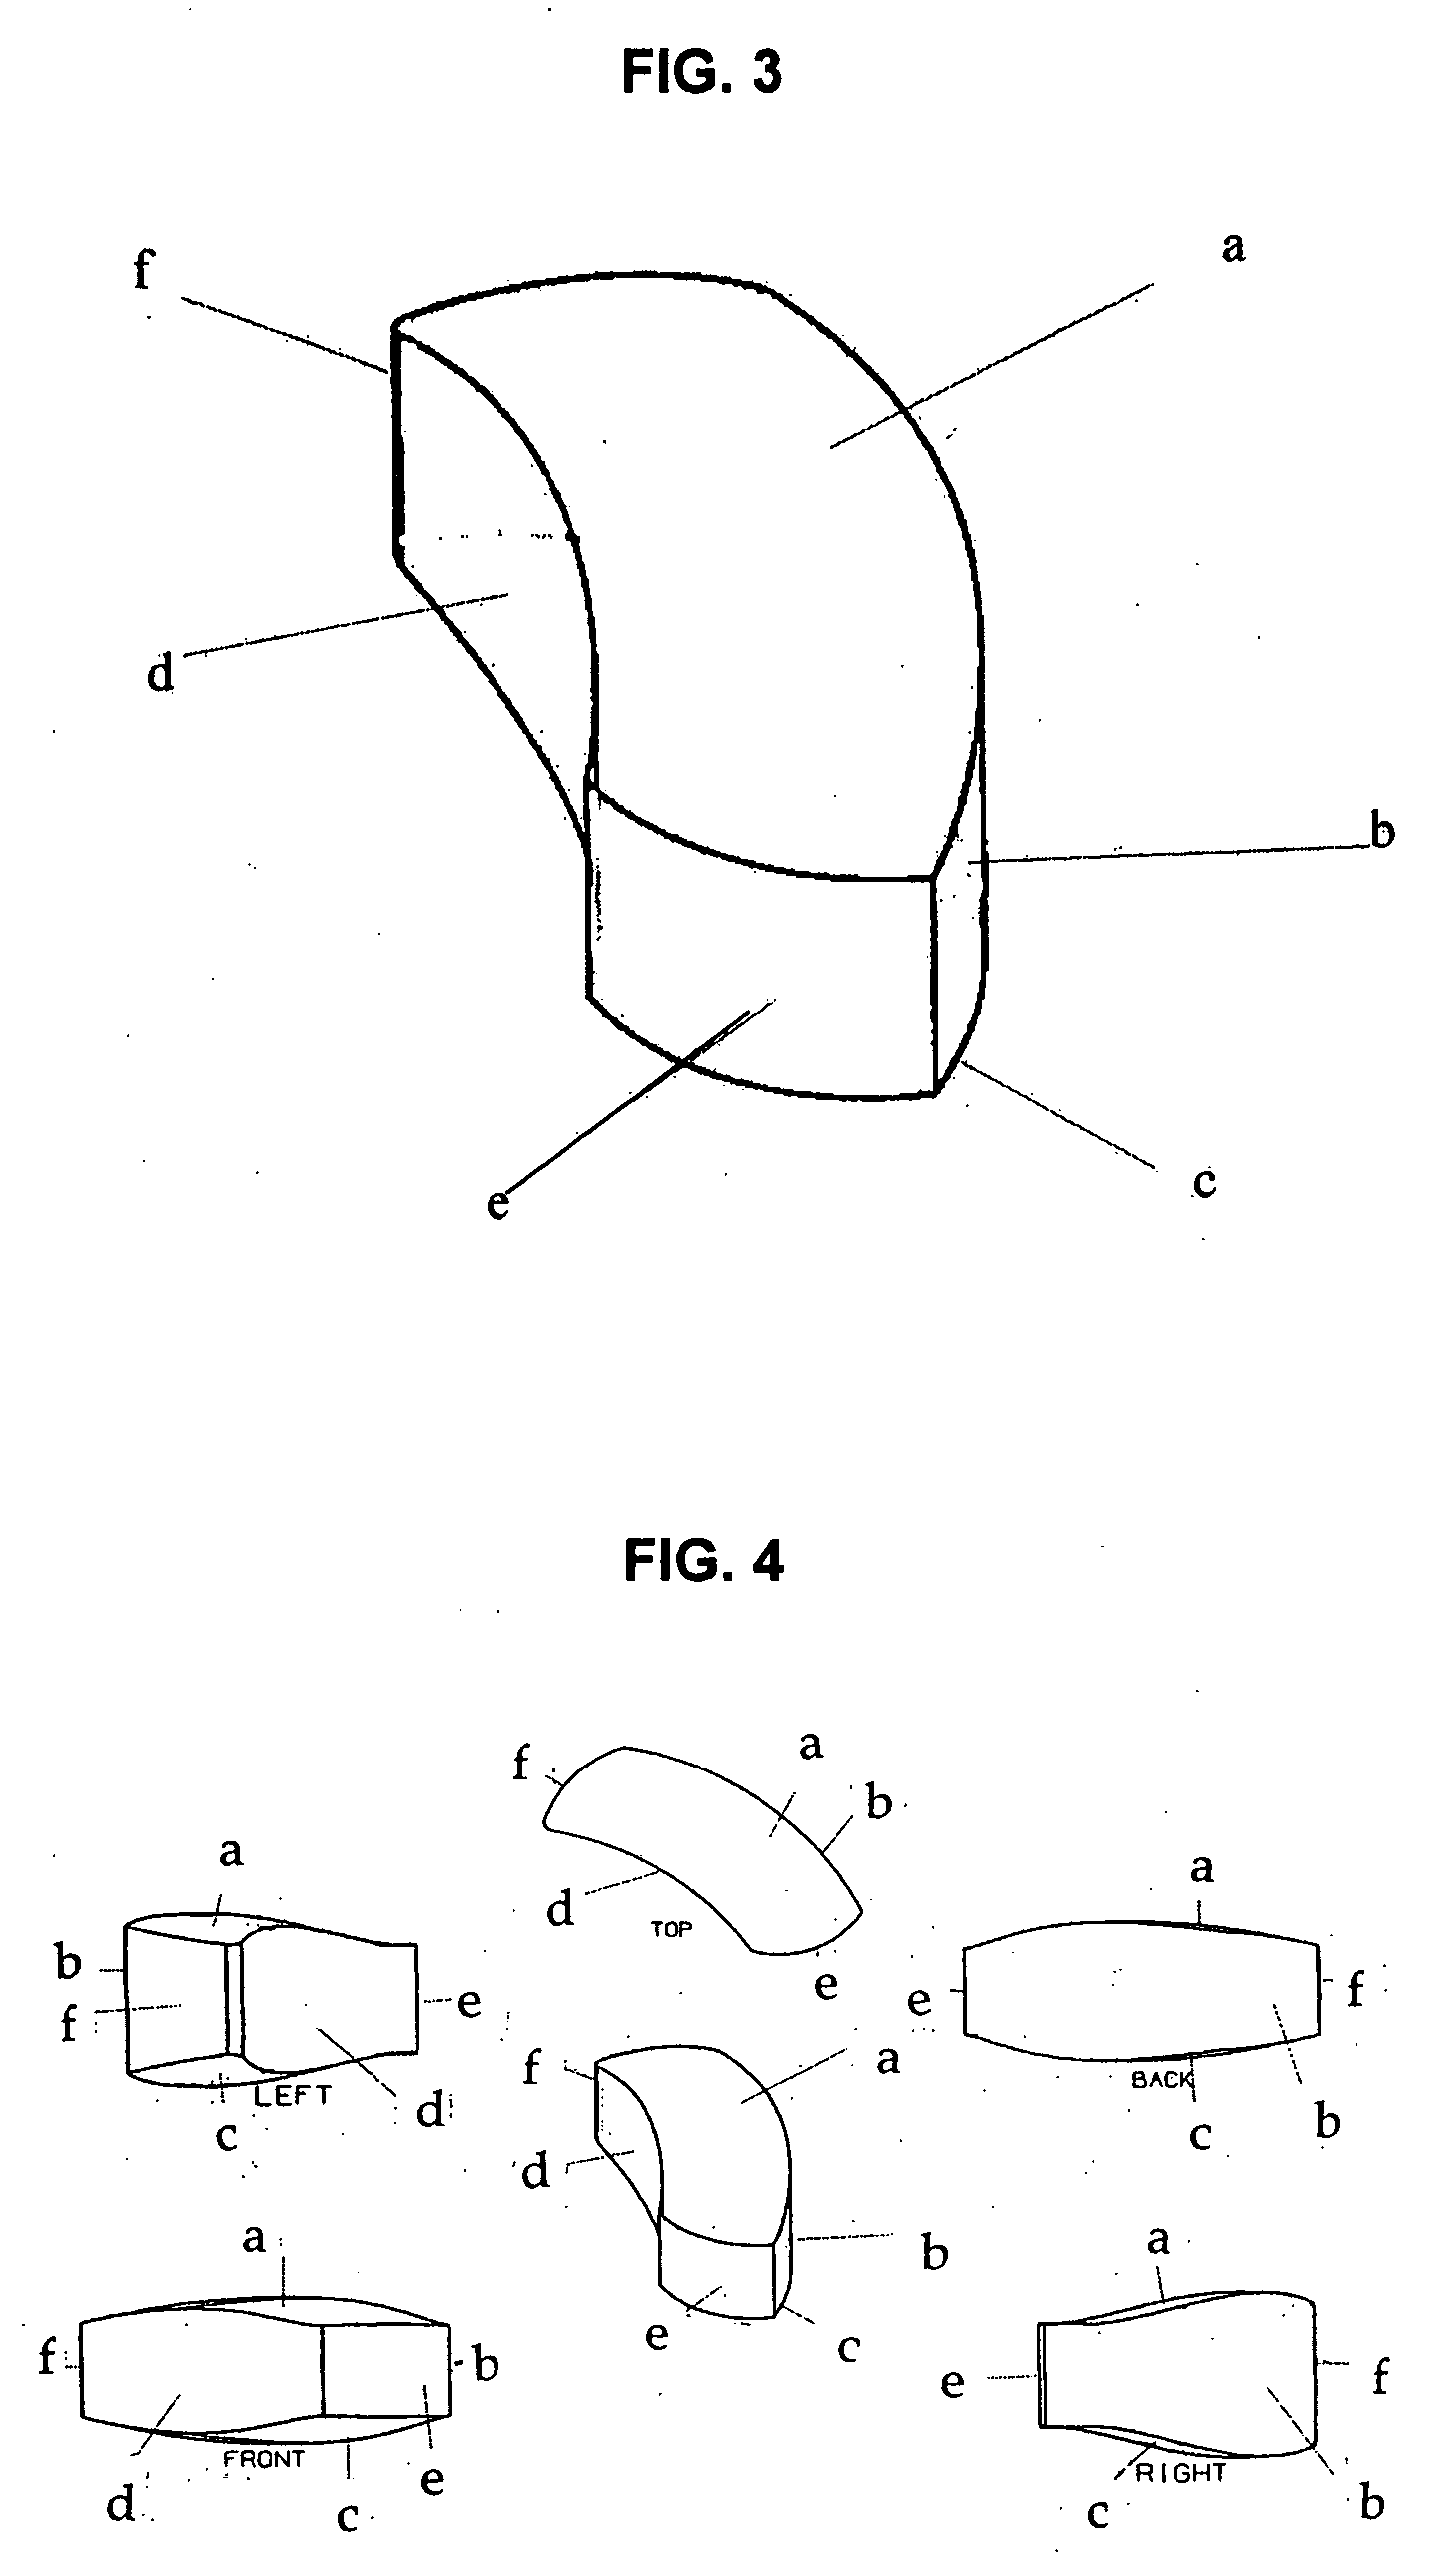 Interbody spinal device